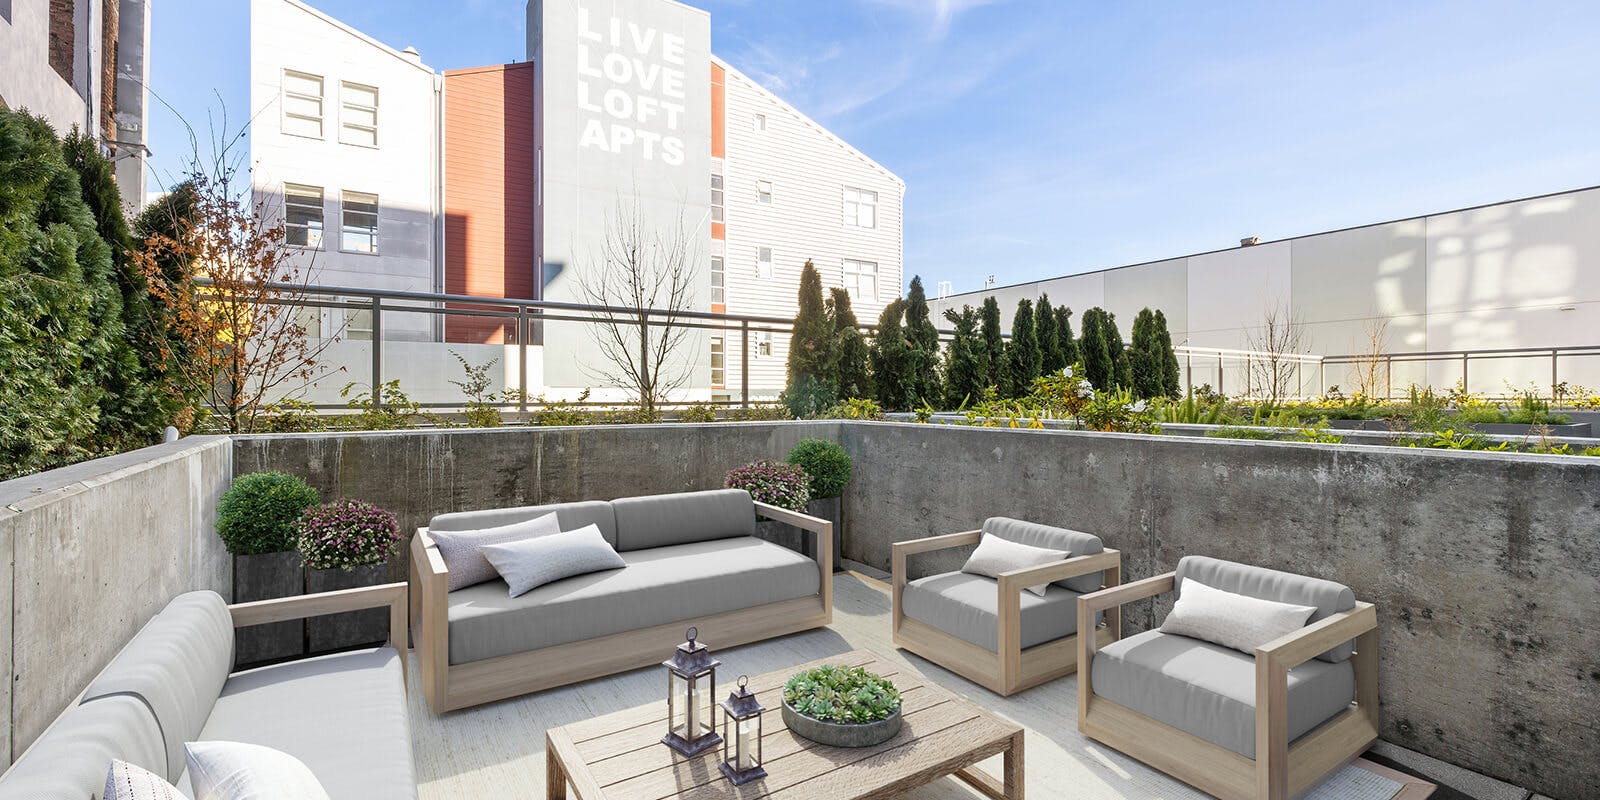 Along with a rooftop terrace, OneEleven SF has second floor deck equipped with comfortable lounge seating. 